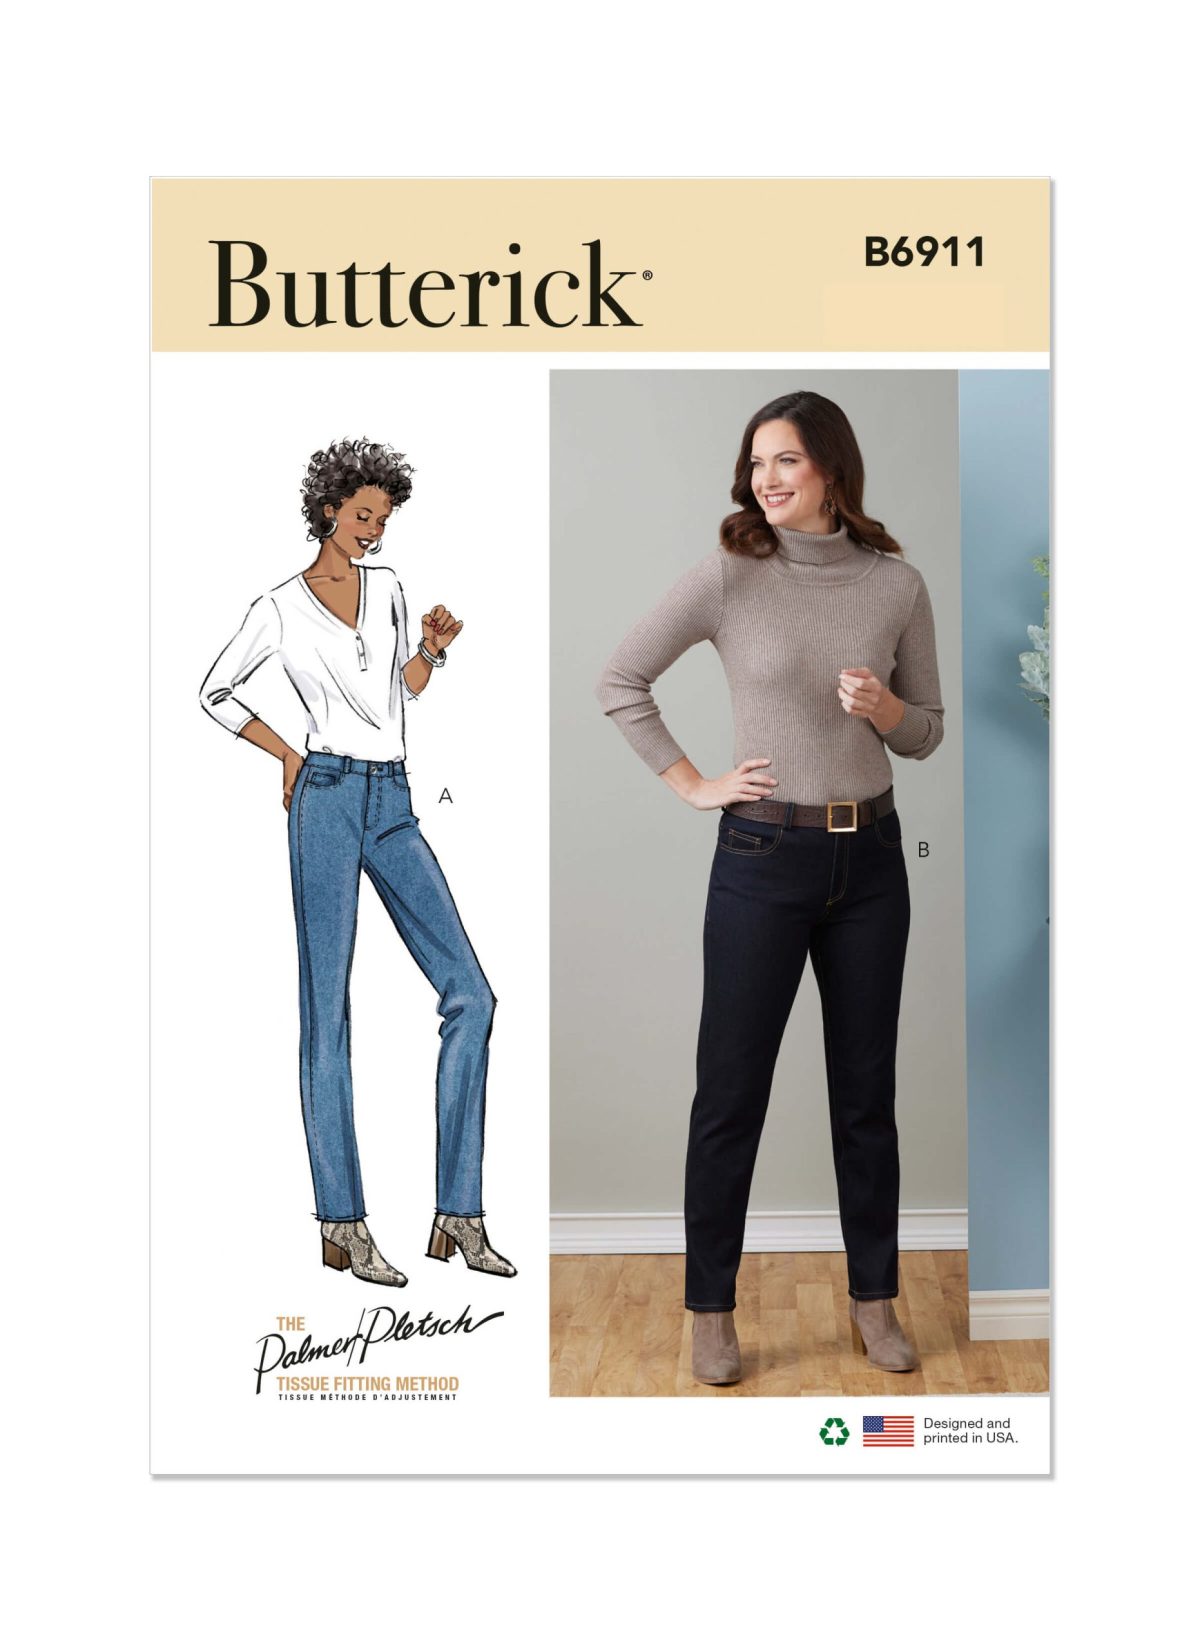 Butterick Sewing Pattern B6911 Misses' Jeans by Palmer/Pletsch